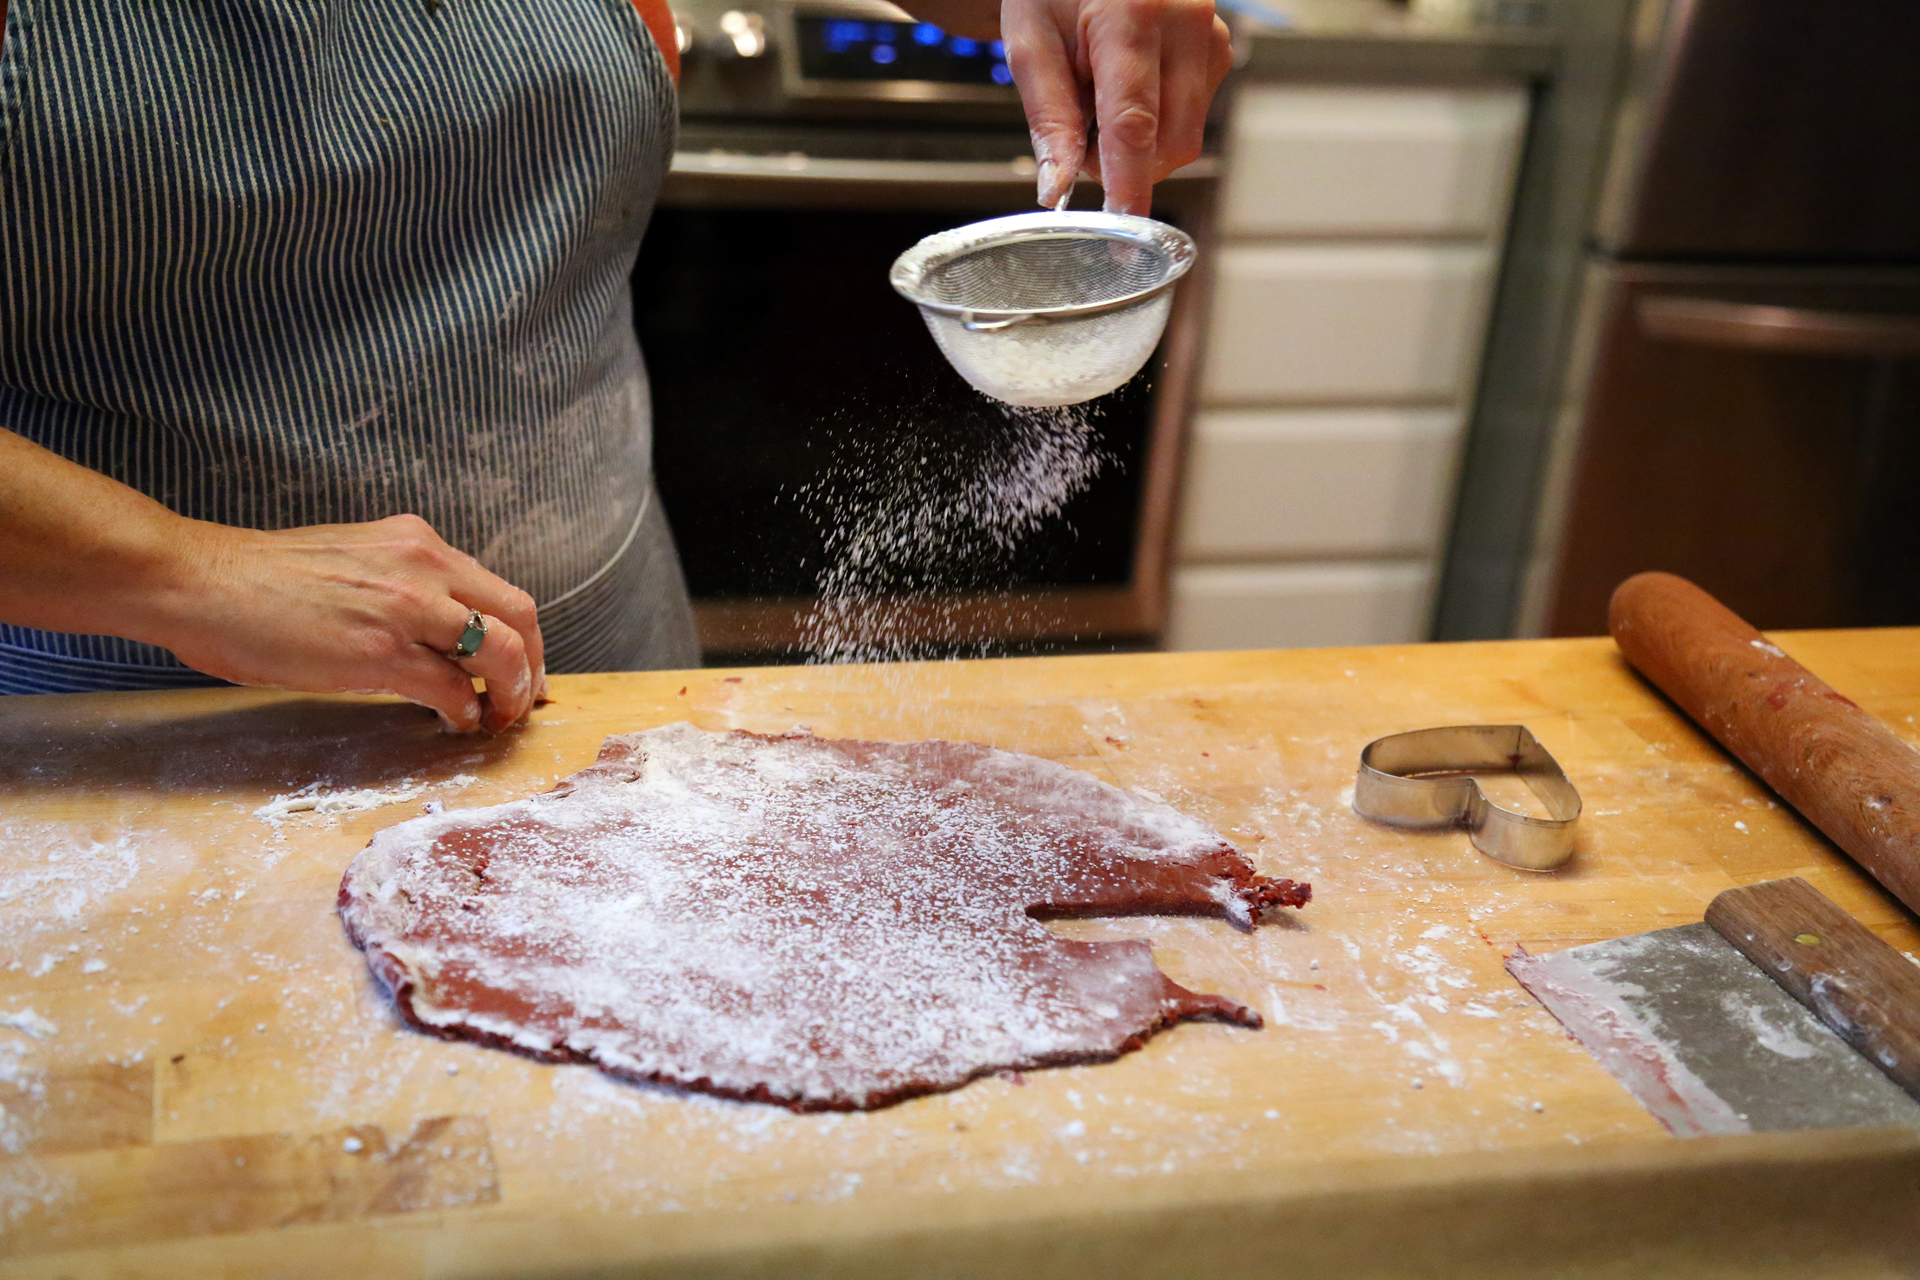 The dough is very soft, so dust it with flour as you roll and cut so it doesn’t stick.